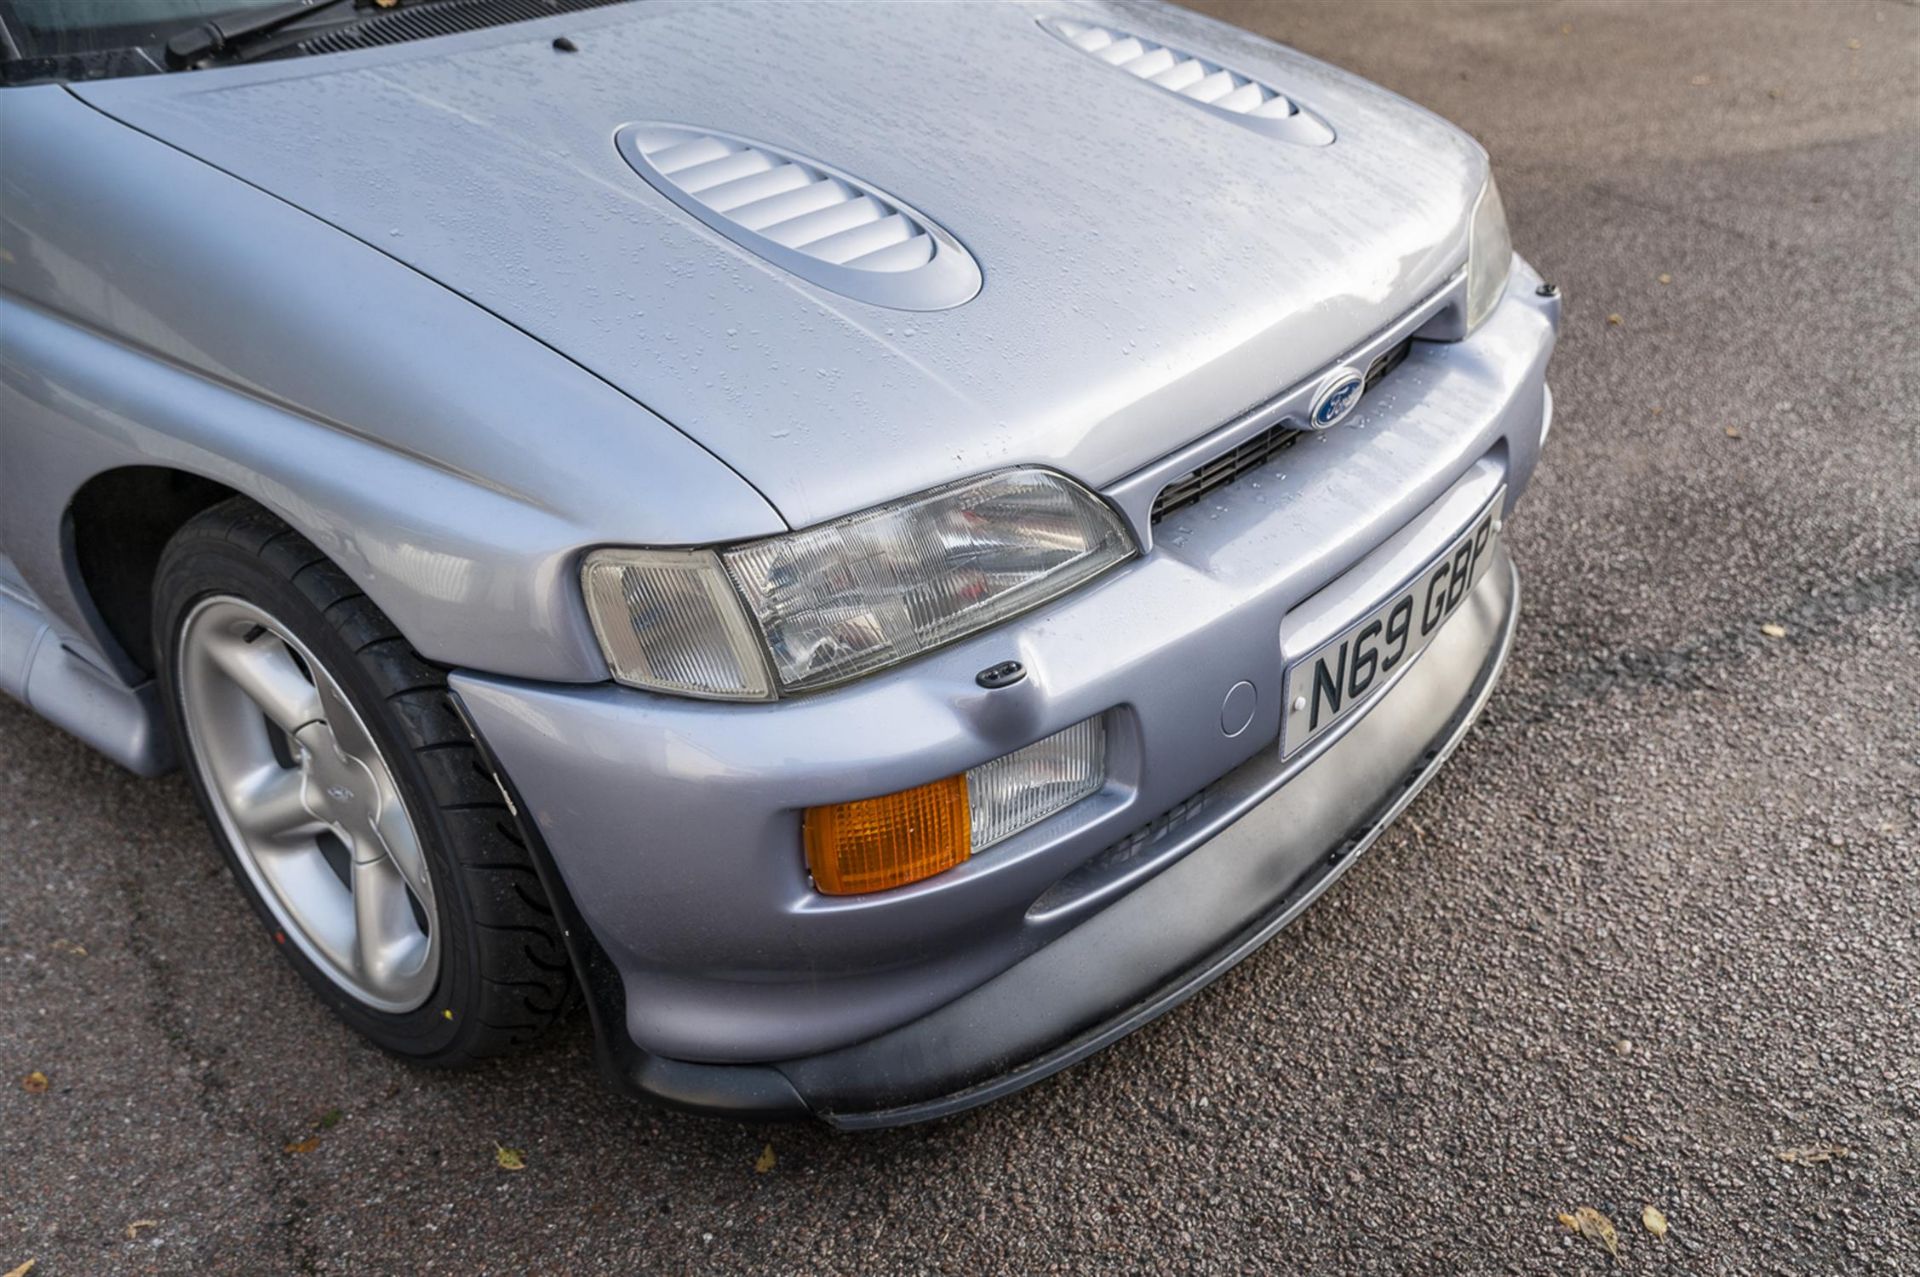 1996 Ford Escort RS Cosworth Lux - Image 7 of 10